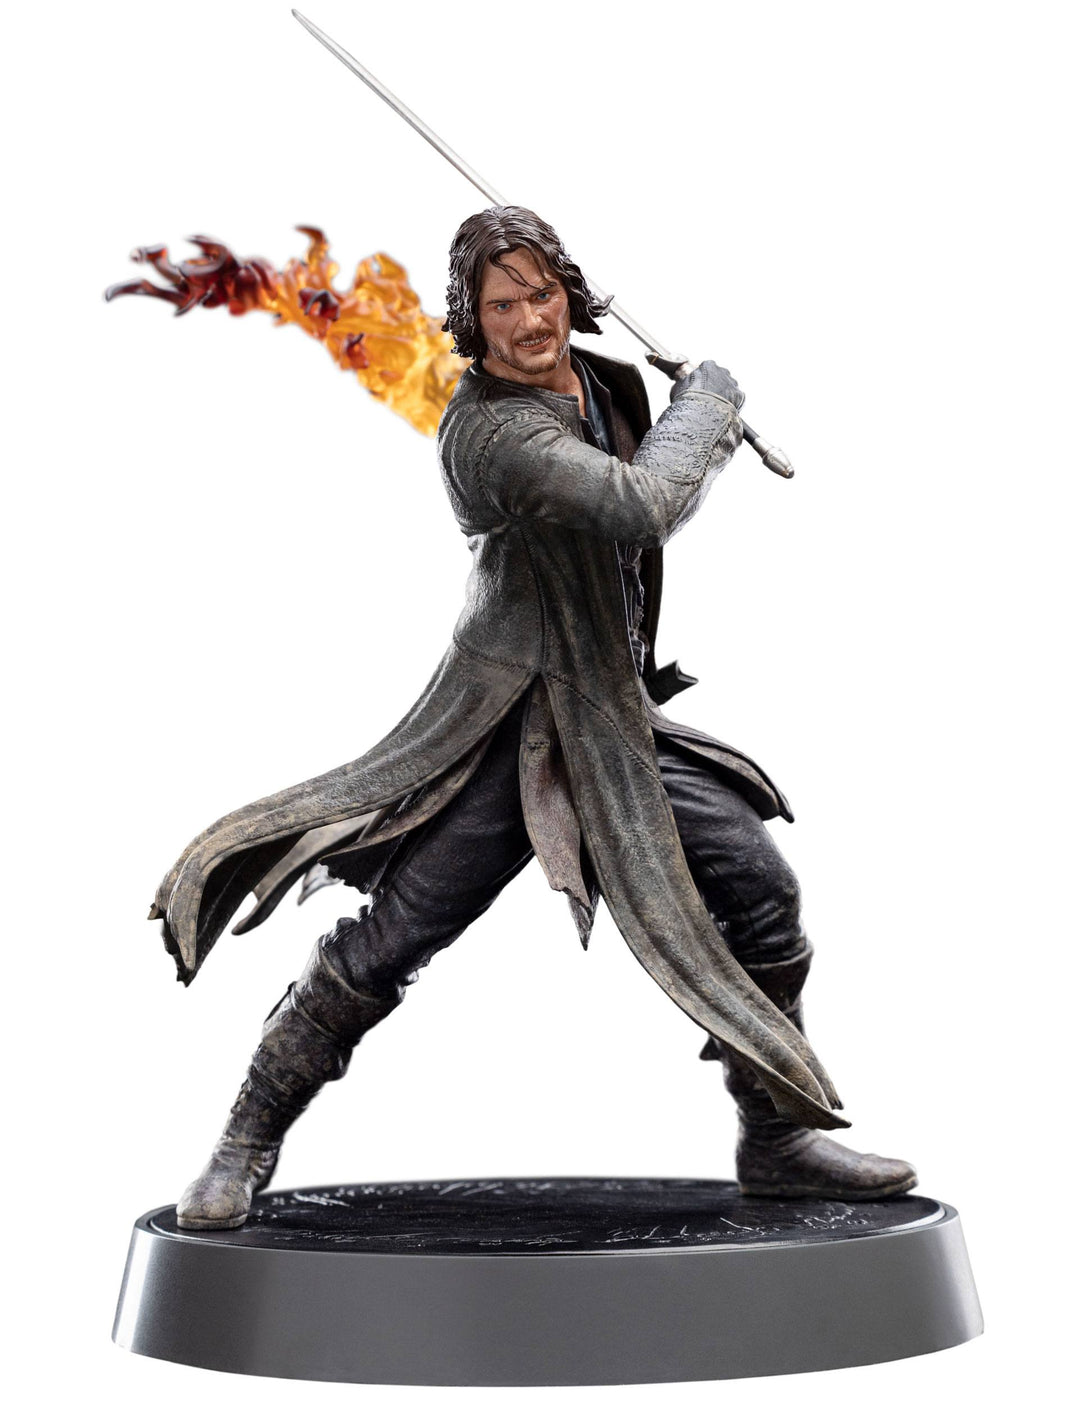 Official The Lord of the Rings Figures of Fandom Aragorn Figure